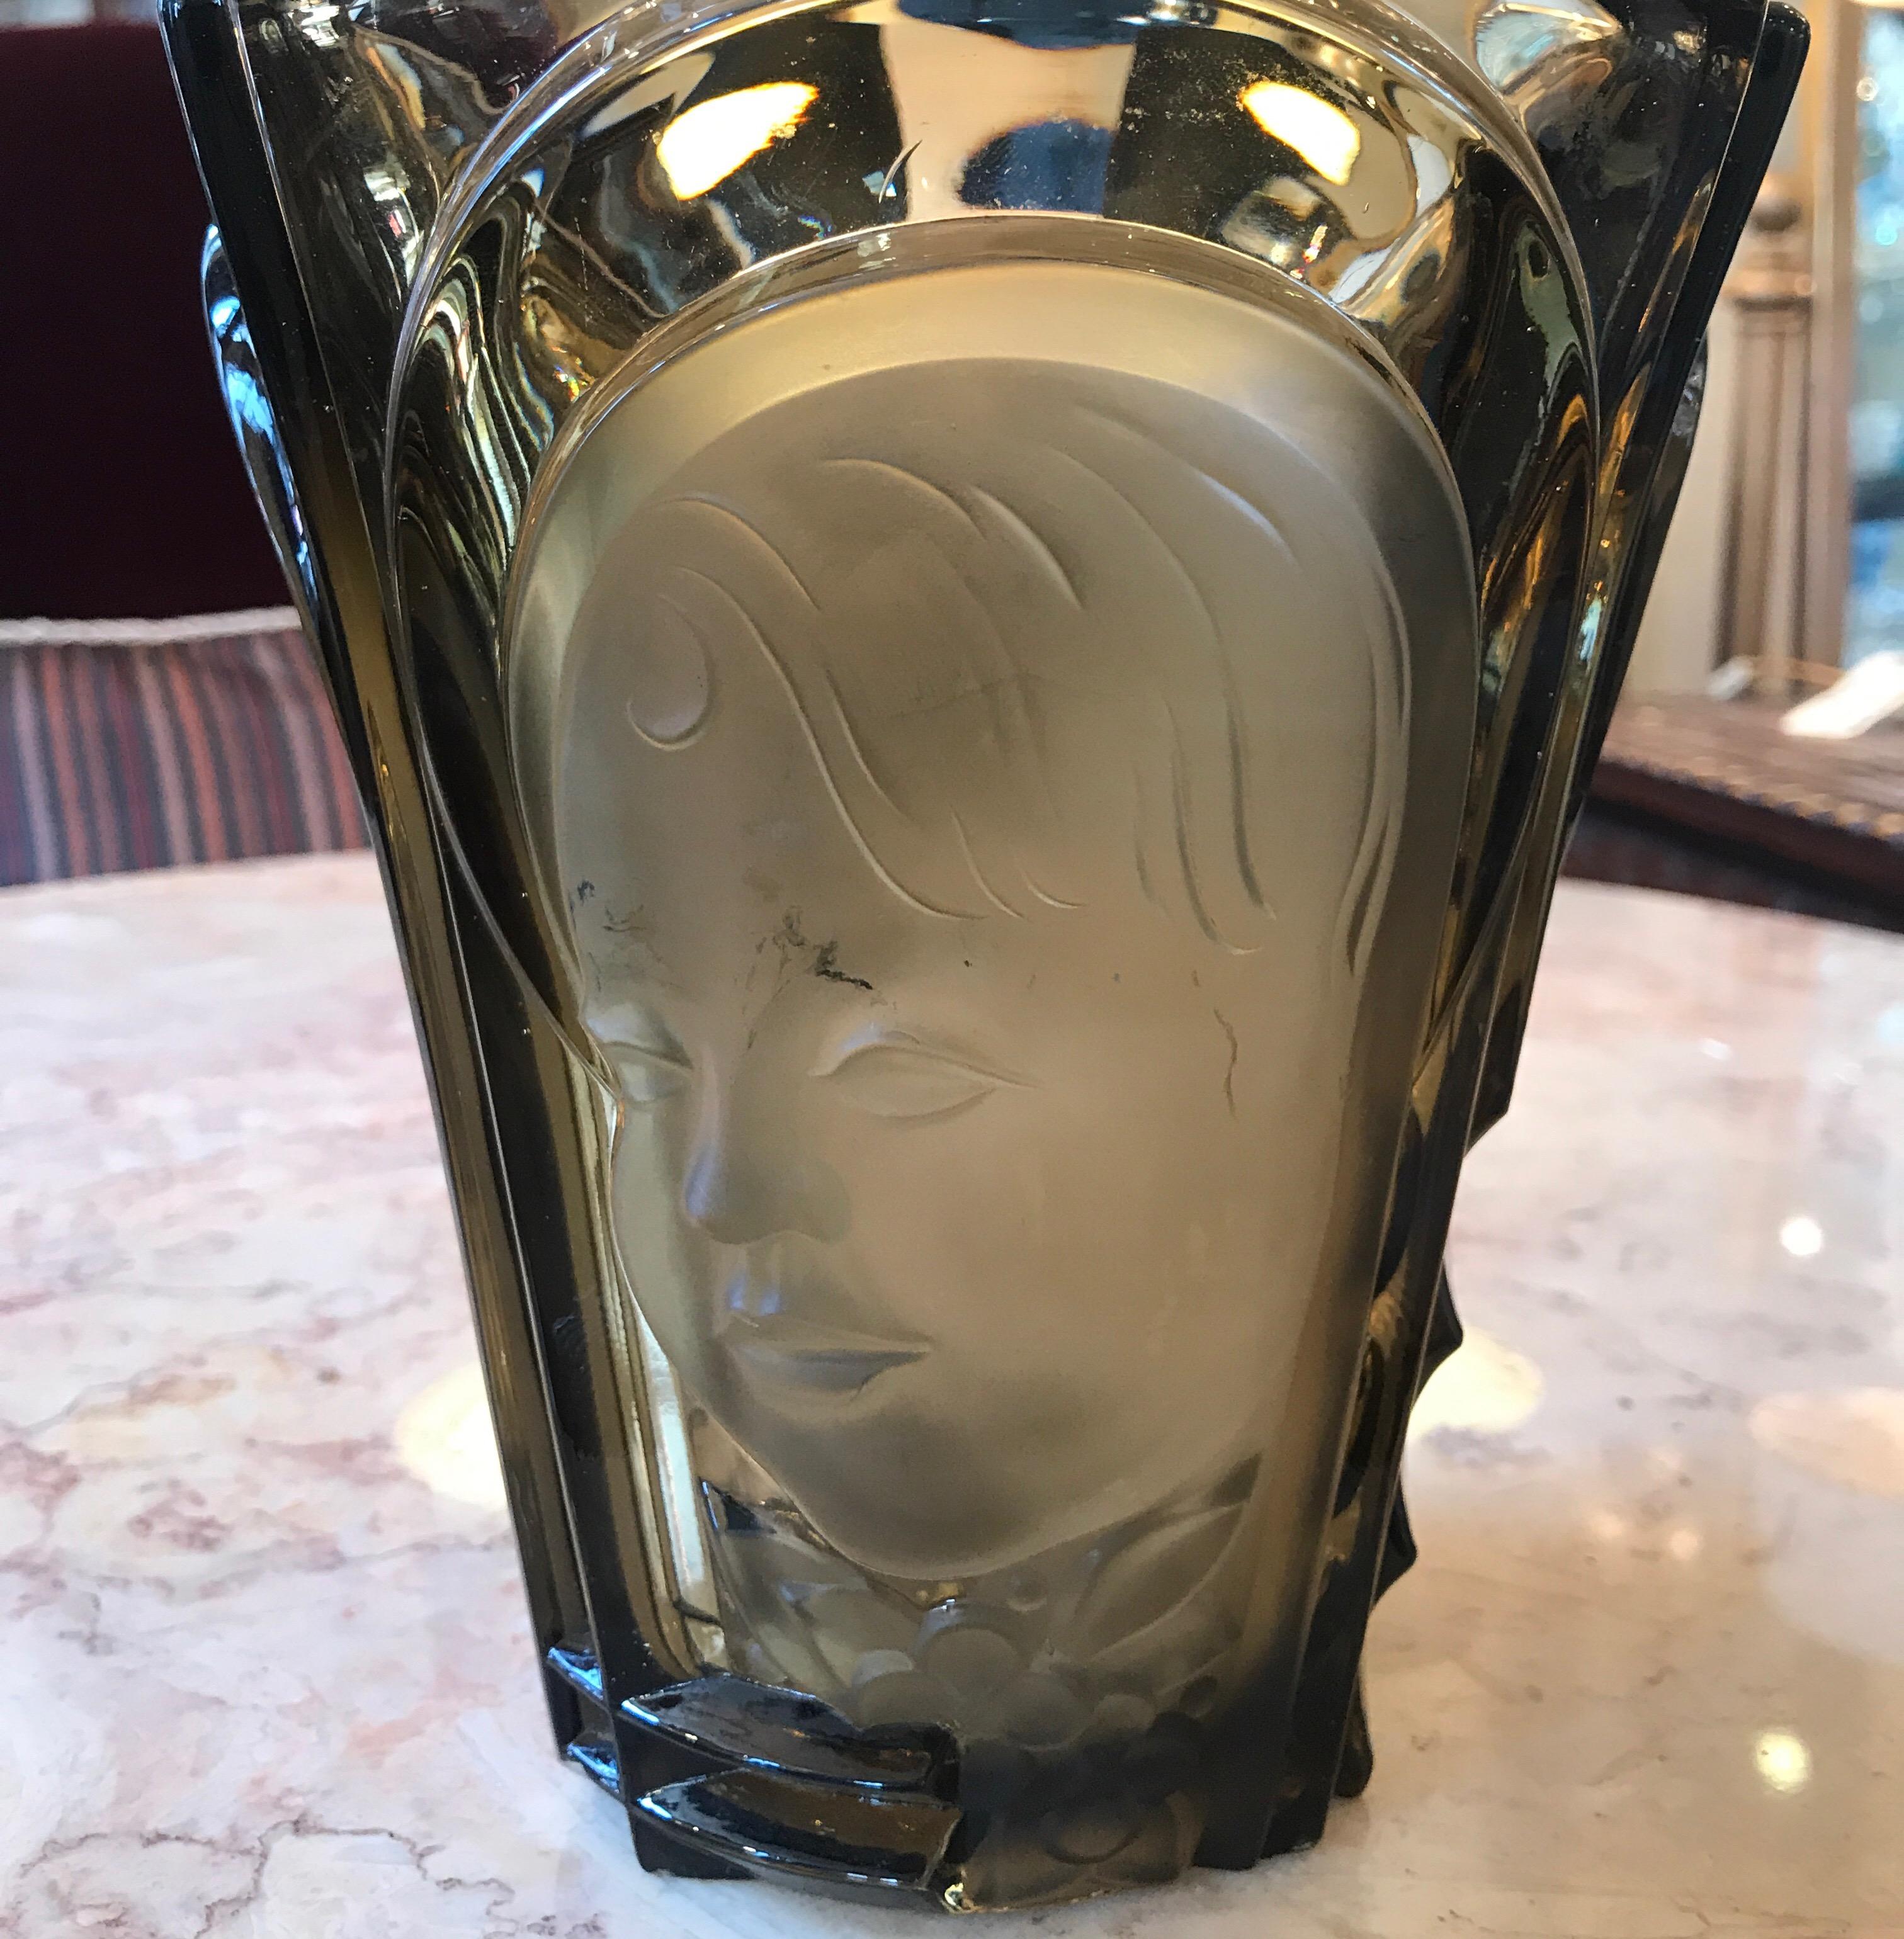 Stunning Art Deco glass vase with triple faces by Ogetti. The smokey topaz glass with frosted faces on three panels around the outside.